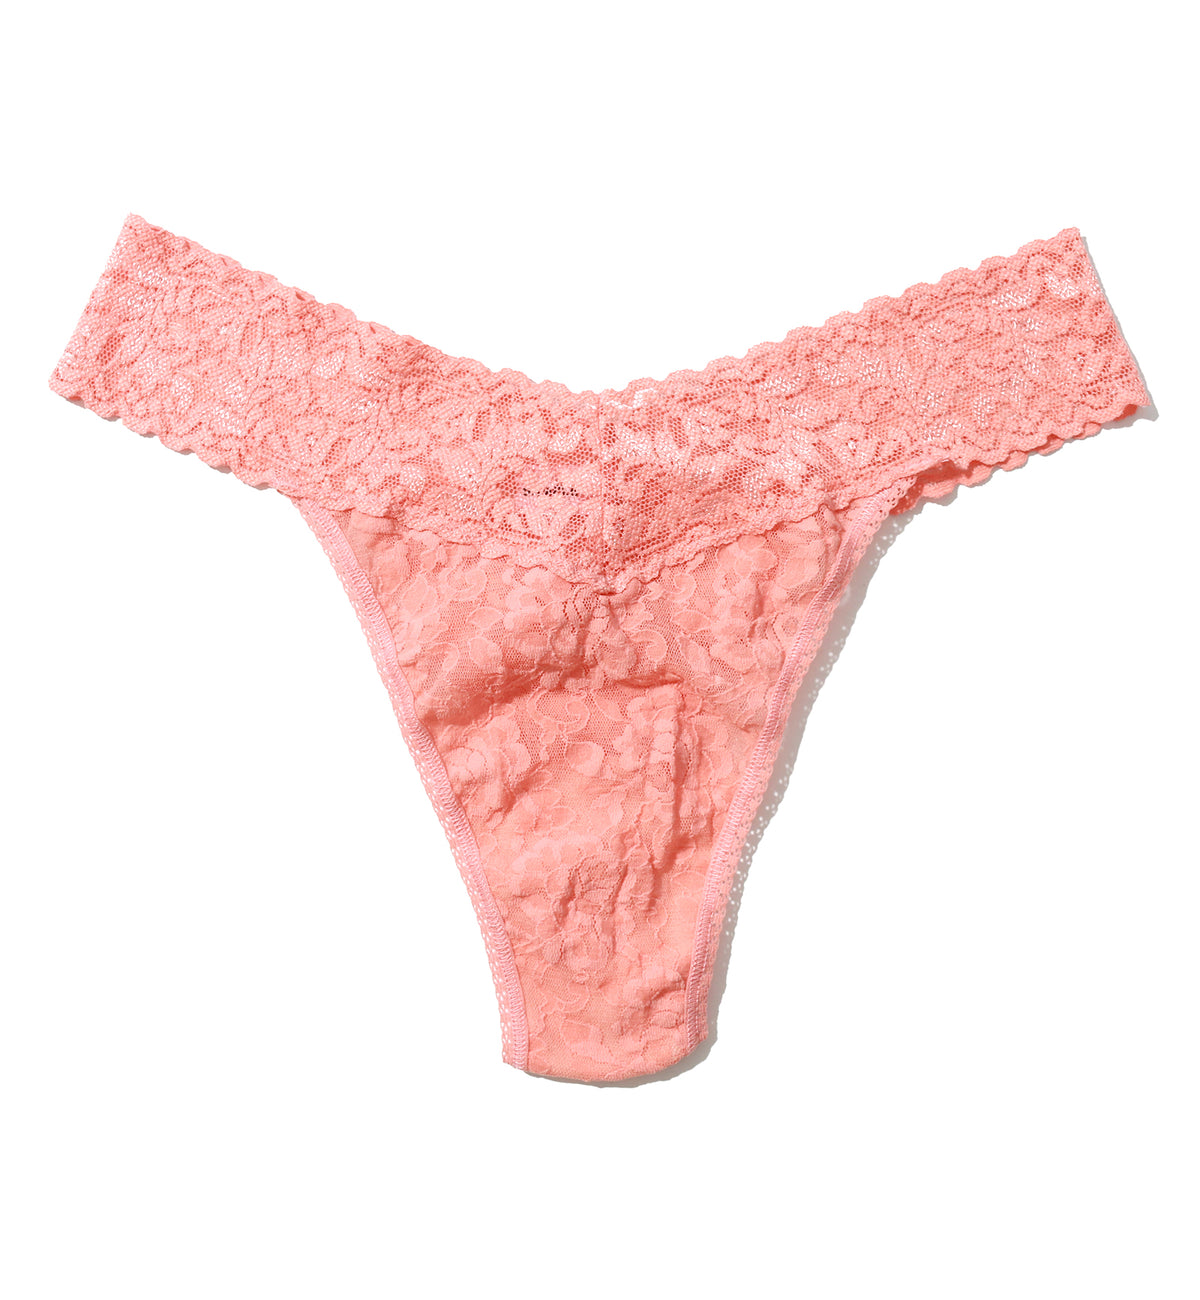 Hanky Panky Signature Lace Original Rise Thong (4811P),Snapdragon - Snapdragon,One Size